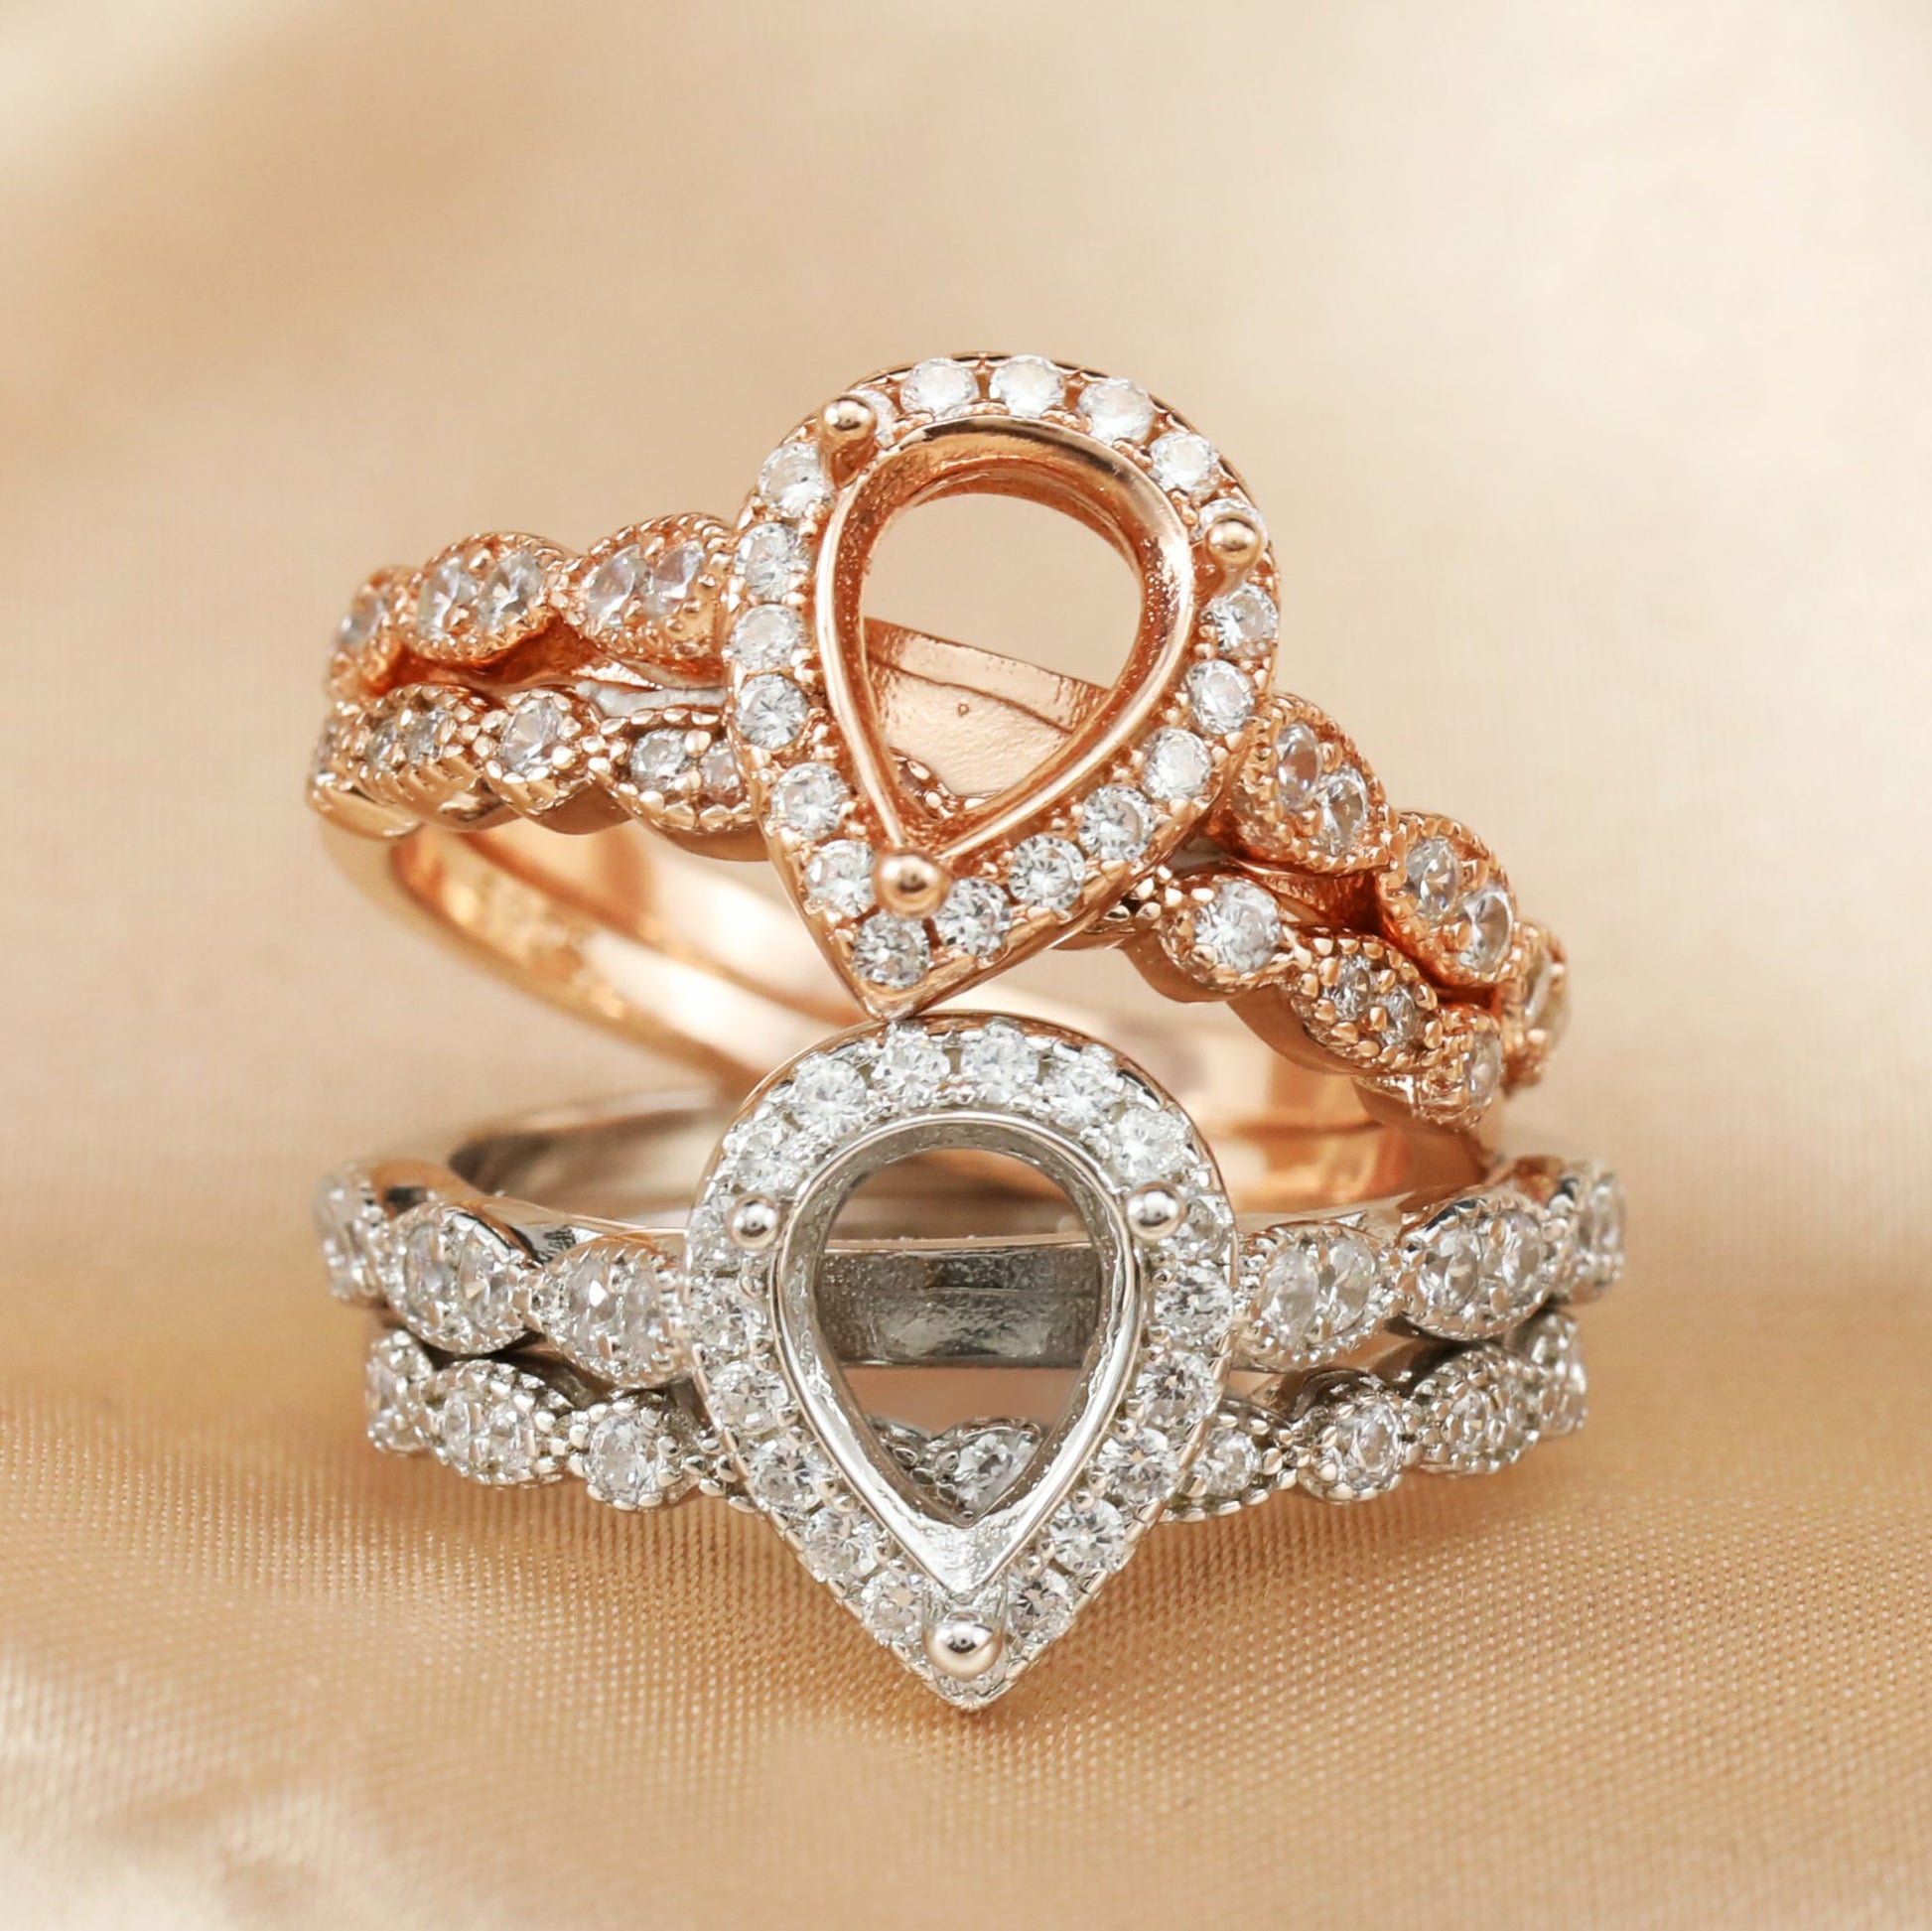 A silver art deco tear drop halo semi mount setting with matching wedding ring and a rose gold identical setting.